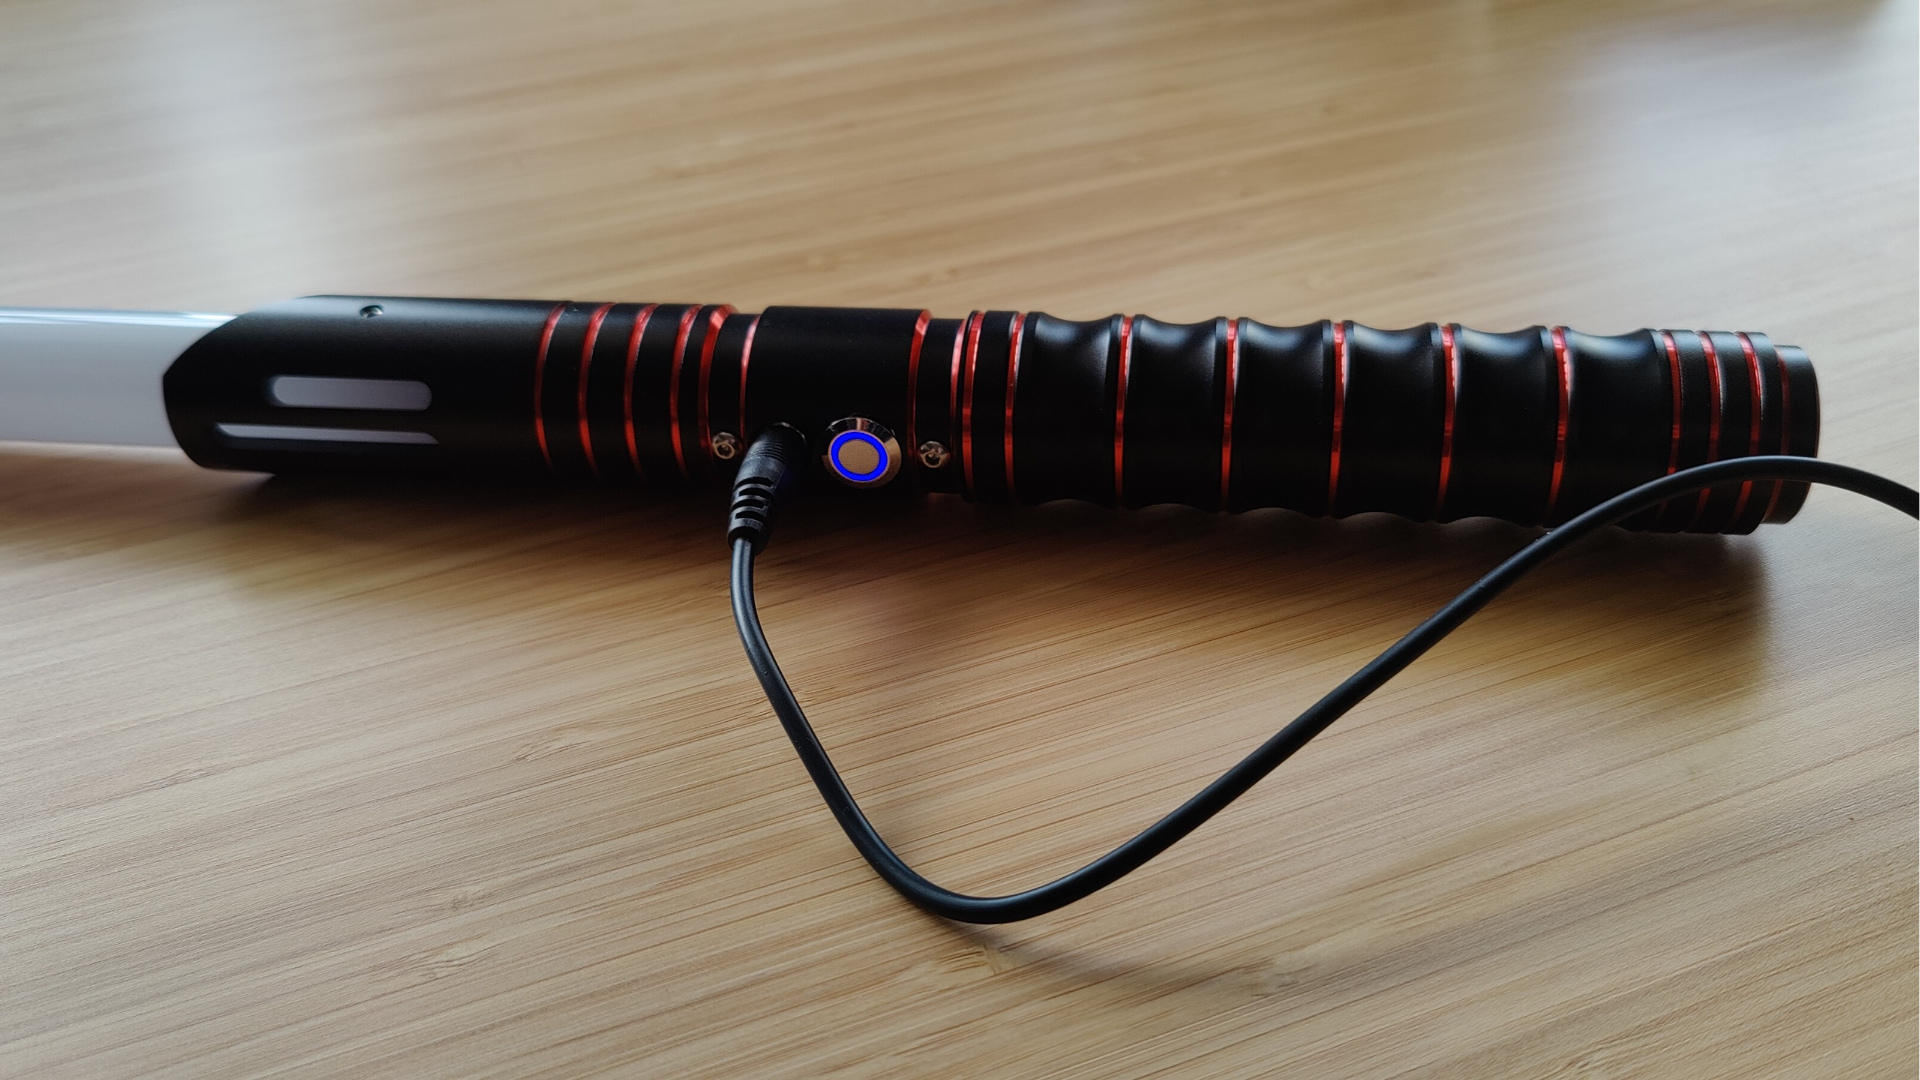 Encalife lightsaber charging using included cable.